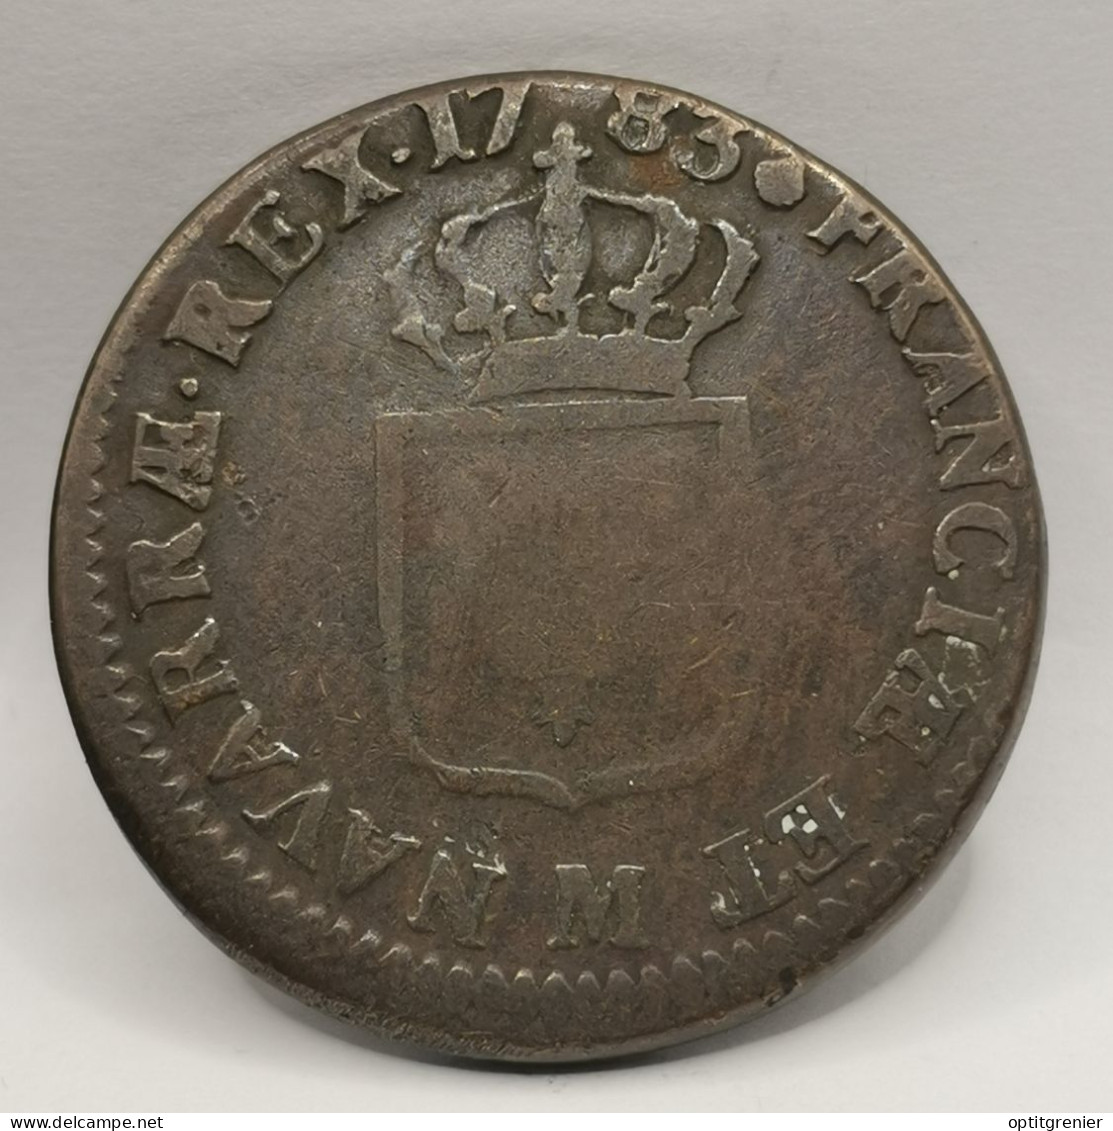 1 SOL LOUIS XVI 1783 M TOULOUSE / FRANCE - 1791-1792 Constitution (An I)